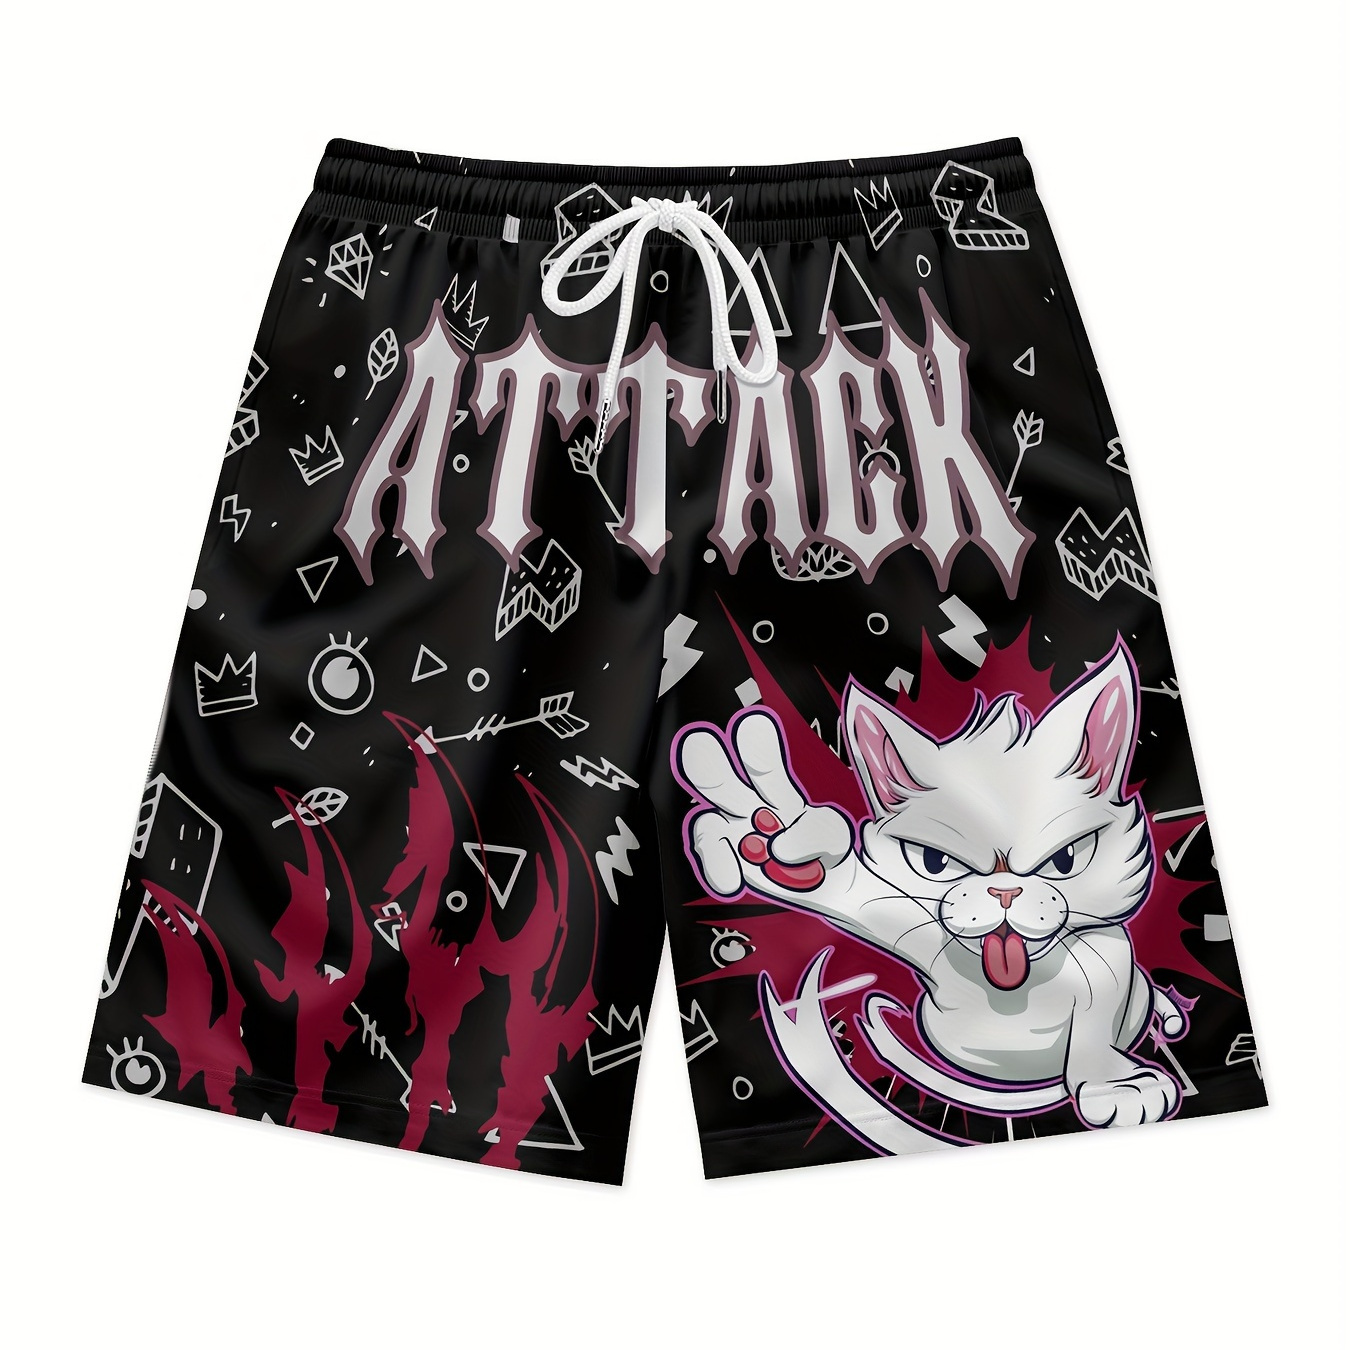 

Attack Cat Print Black Shorts For Men Quick Dry Breathable Polyester Beach Board Shorts Streetwear Shorts Clothing Bottoms